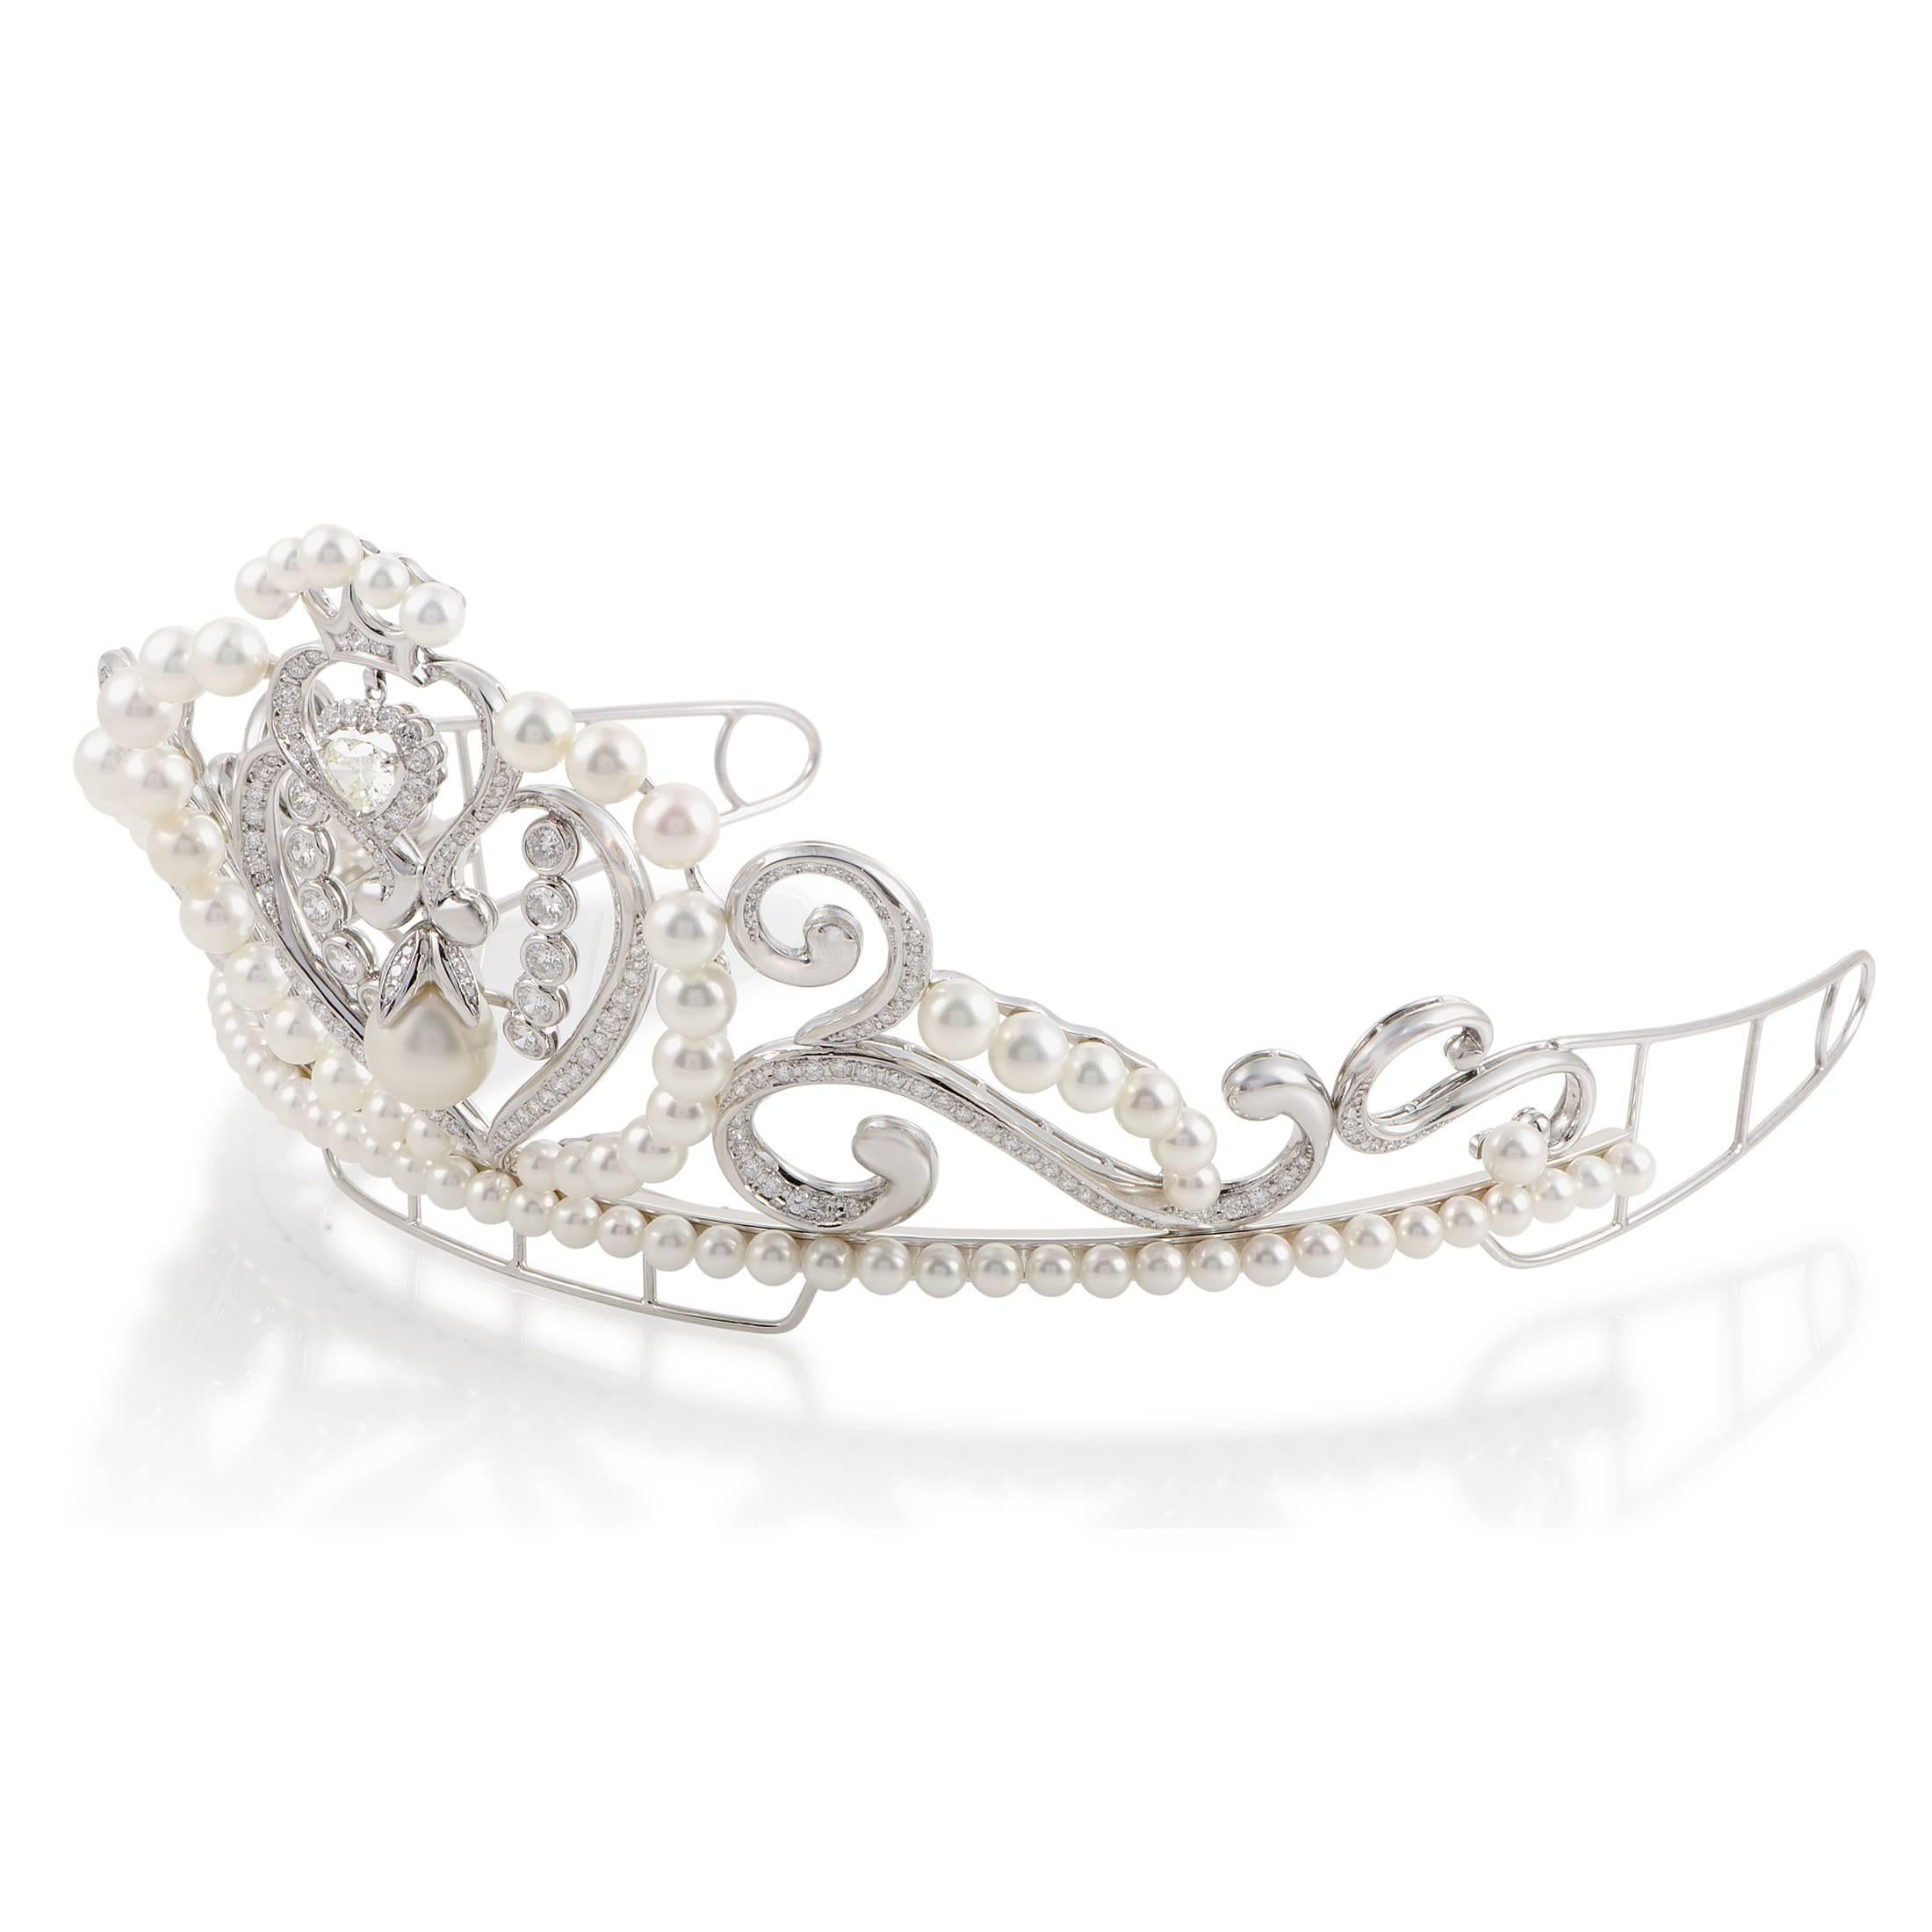 With a stunning central L-colored diamond of VS clarity weighing 1.67 carats, alongside 7.95ct of diamond brilliance in this tantalizing 18K white gold tiara which also boasts splendid pearls to perfectly complete the sight.
